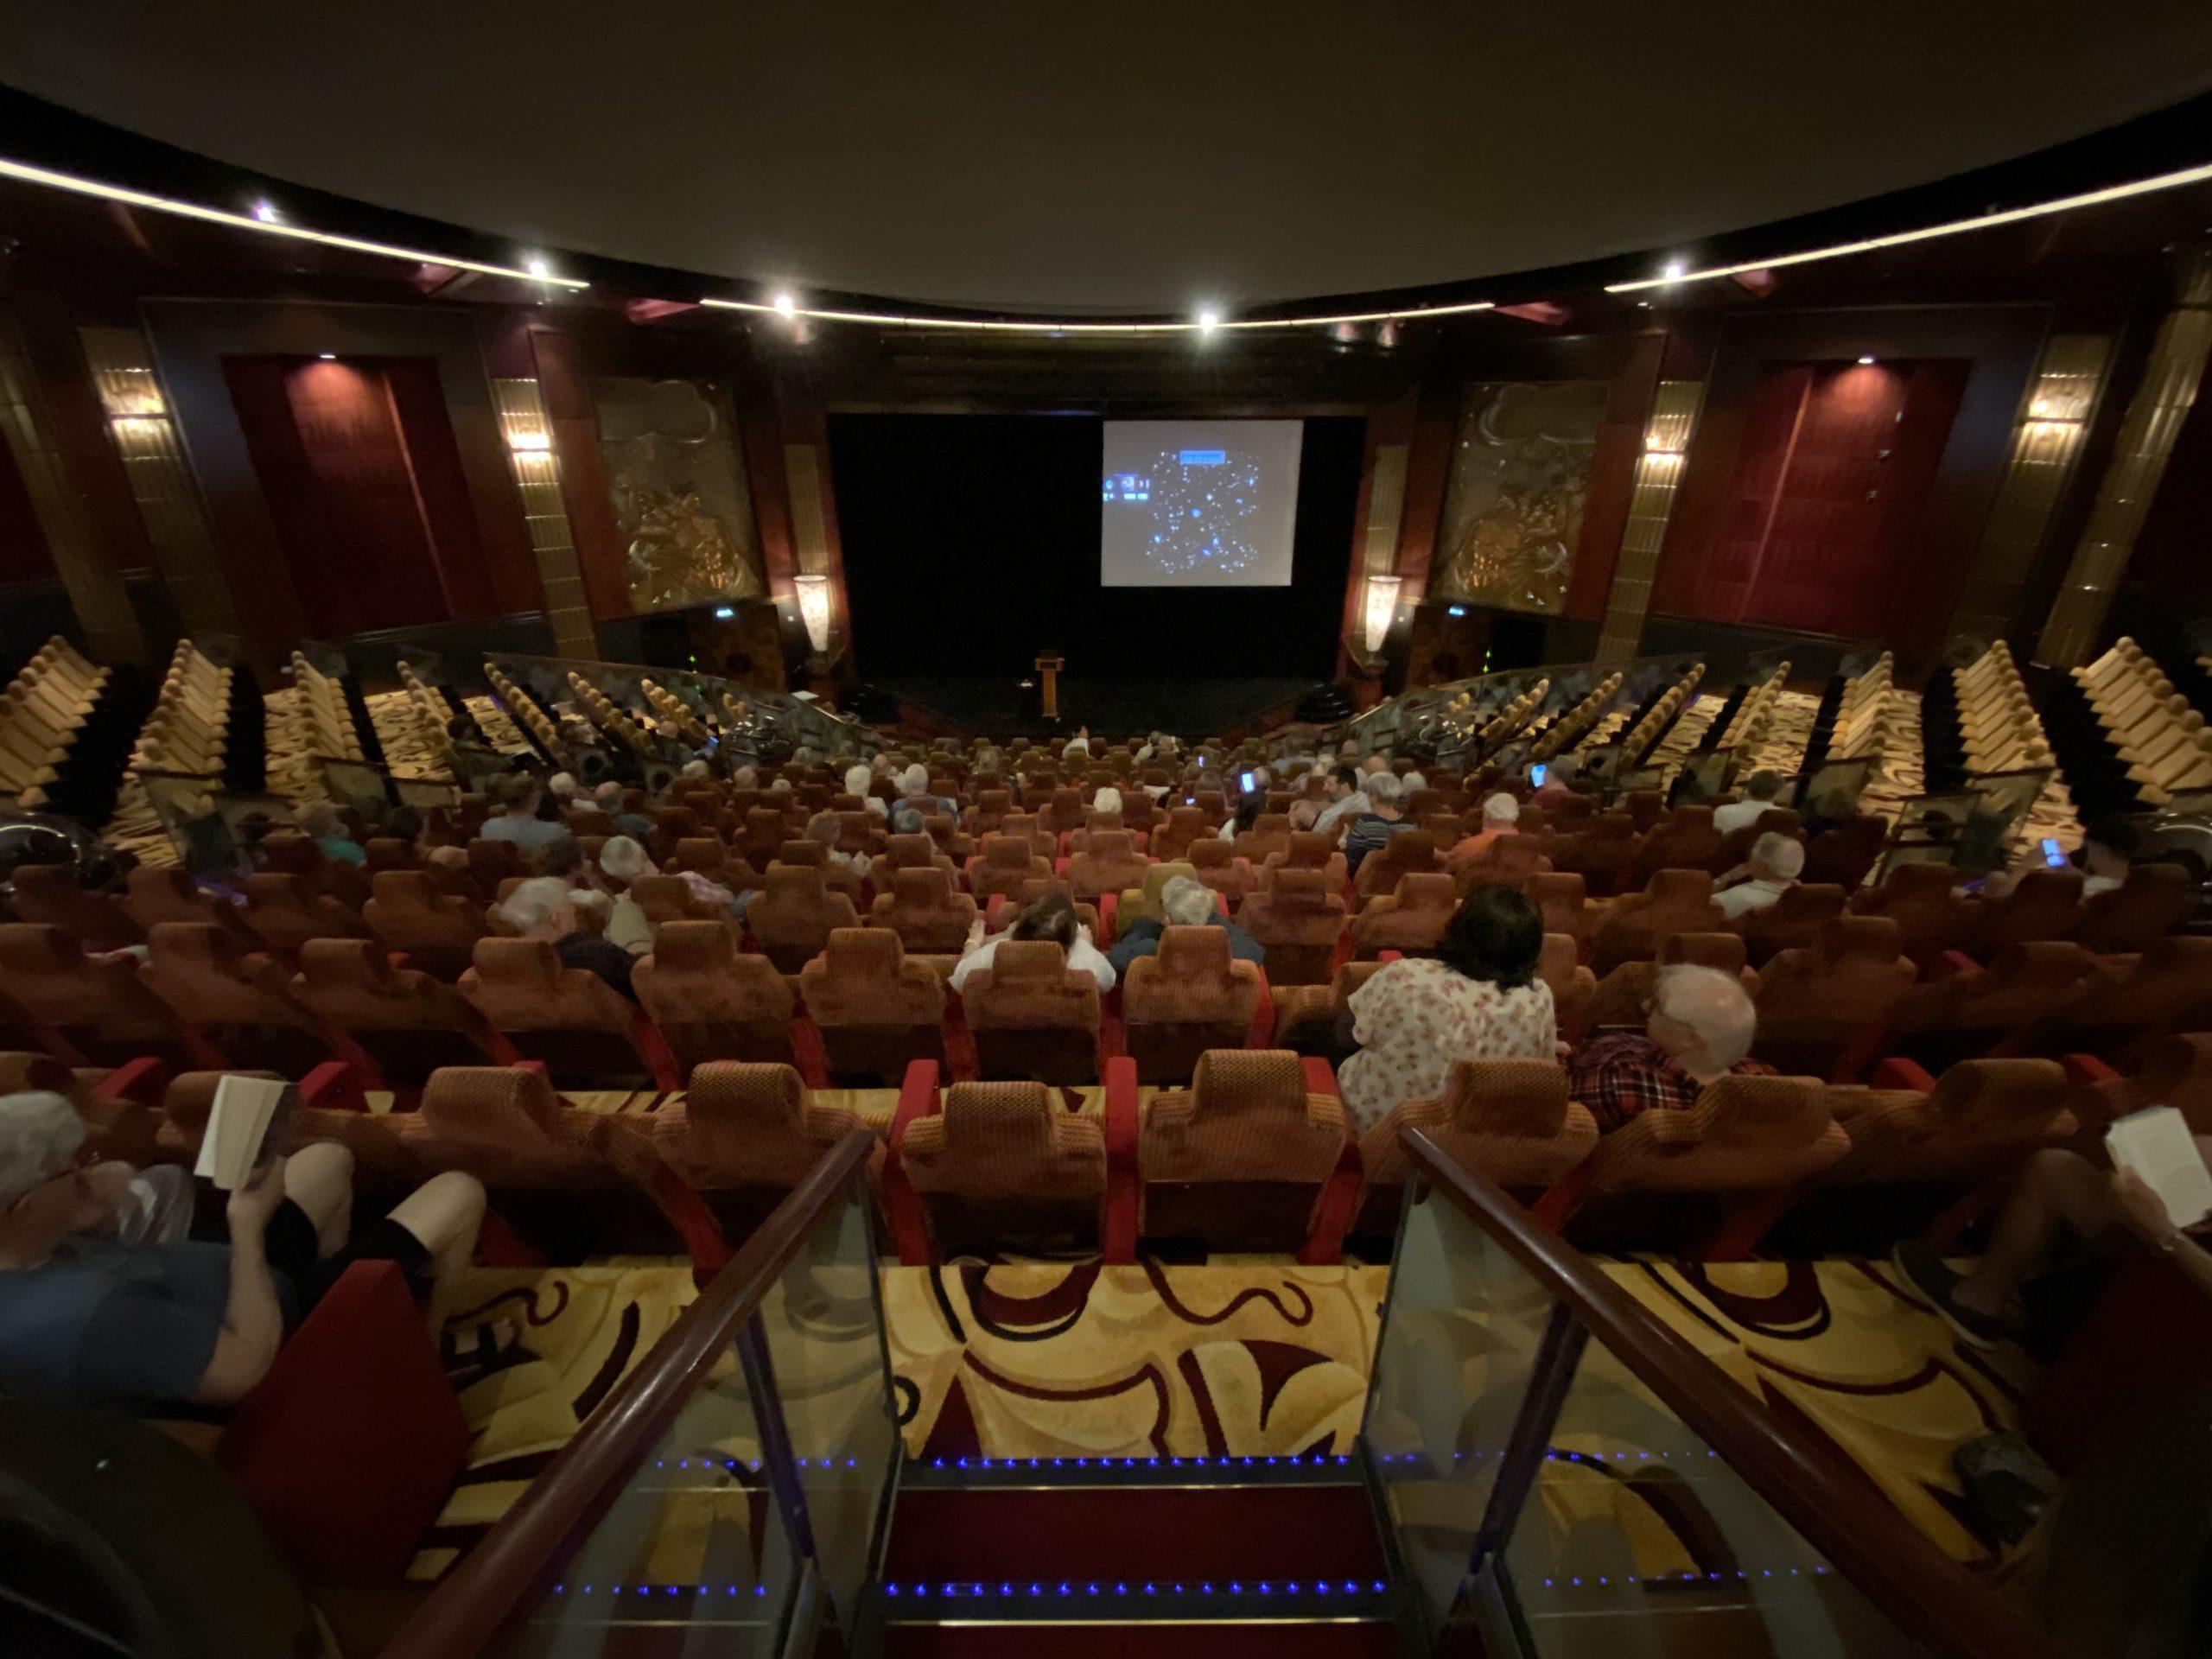 A view of the lecture hall and planetarium from the back, with people starting to take seats and an image of a starfield on the screen on the stage.